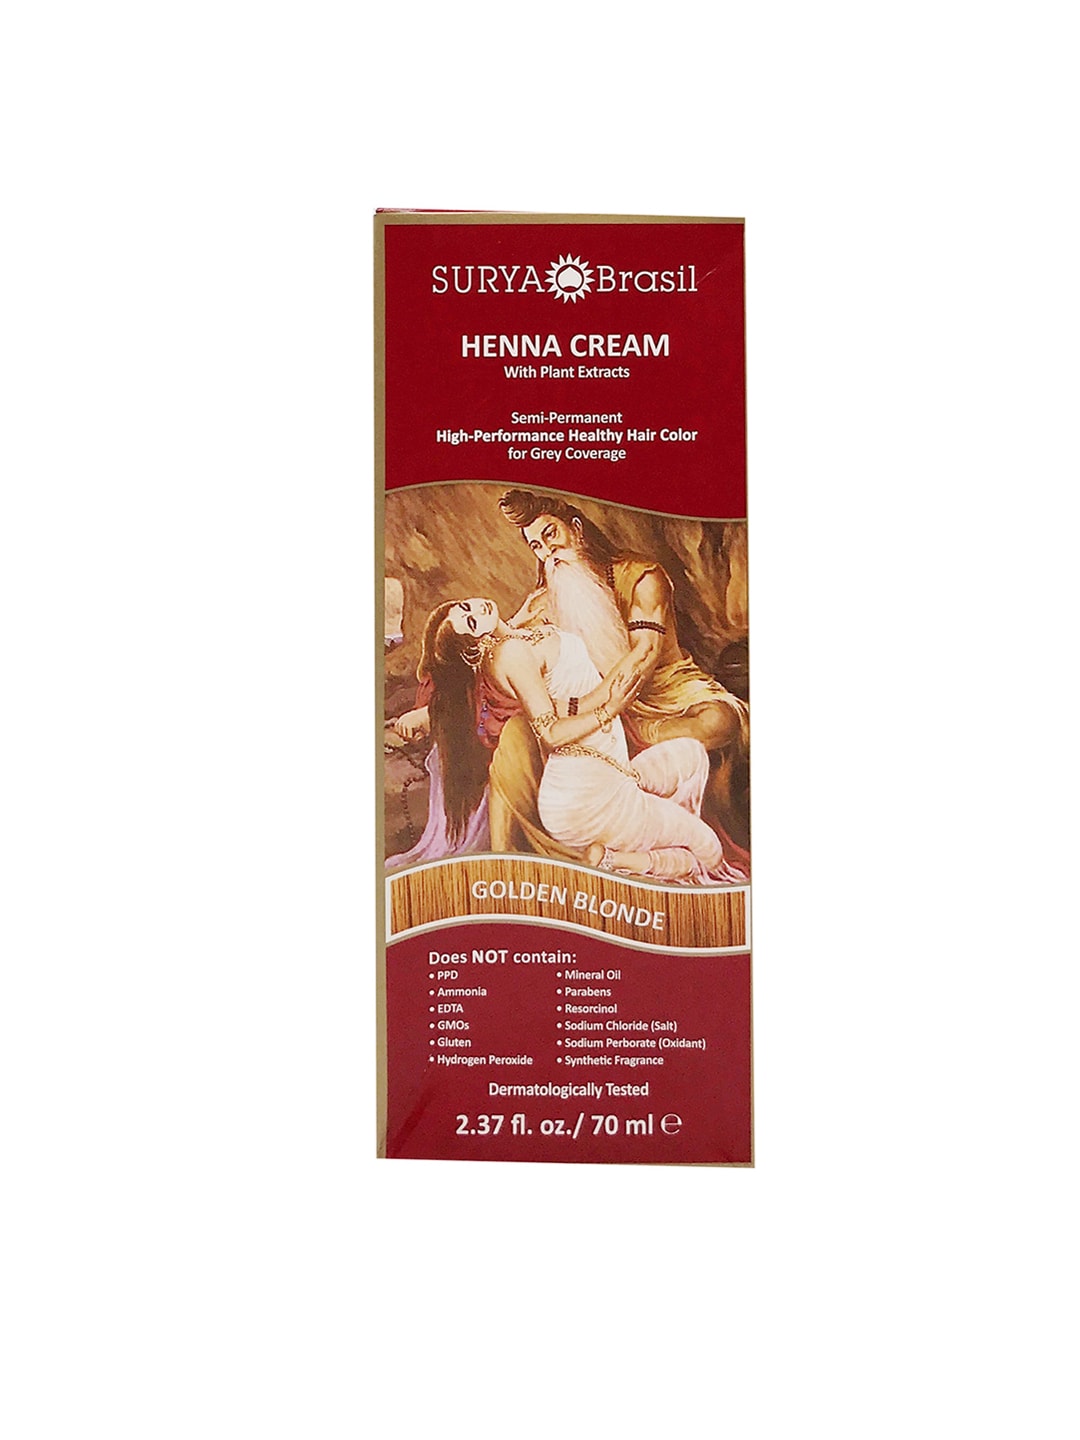 SURYA Brasil Henna Cream Semi-Permanent Hair Color with Plant Extracts 70ml -Golden Blonde Price in India